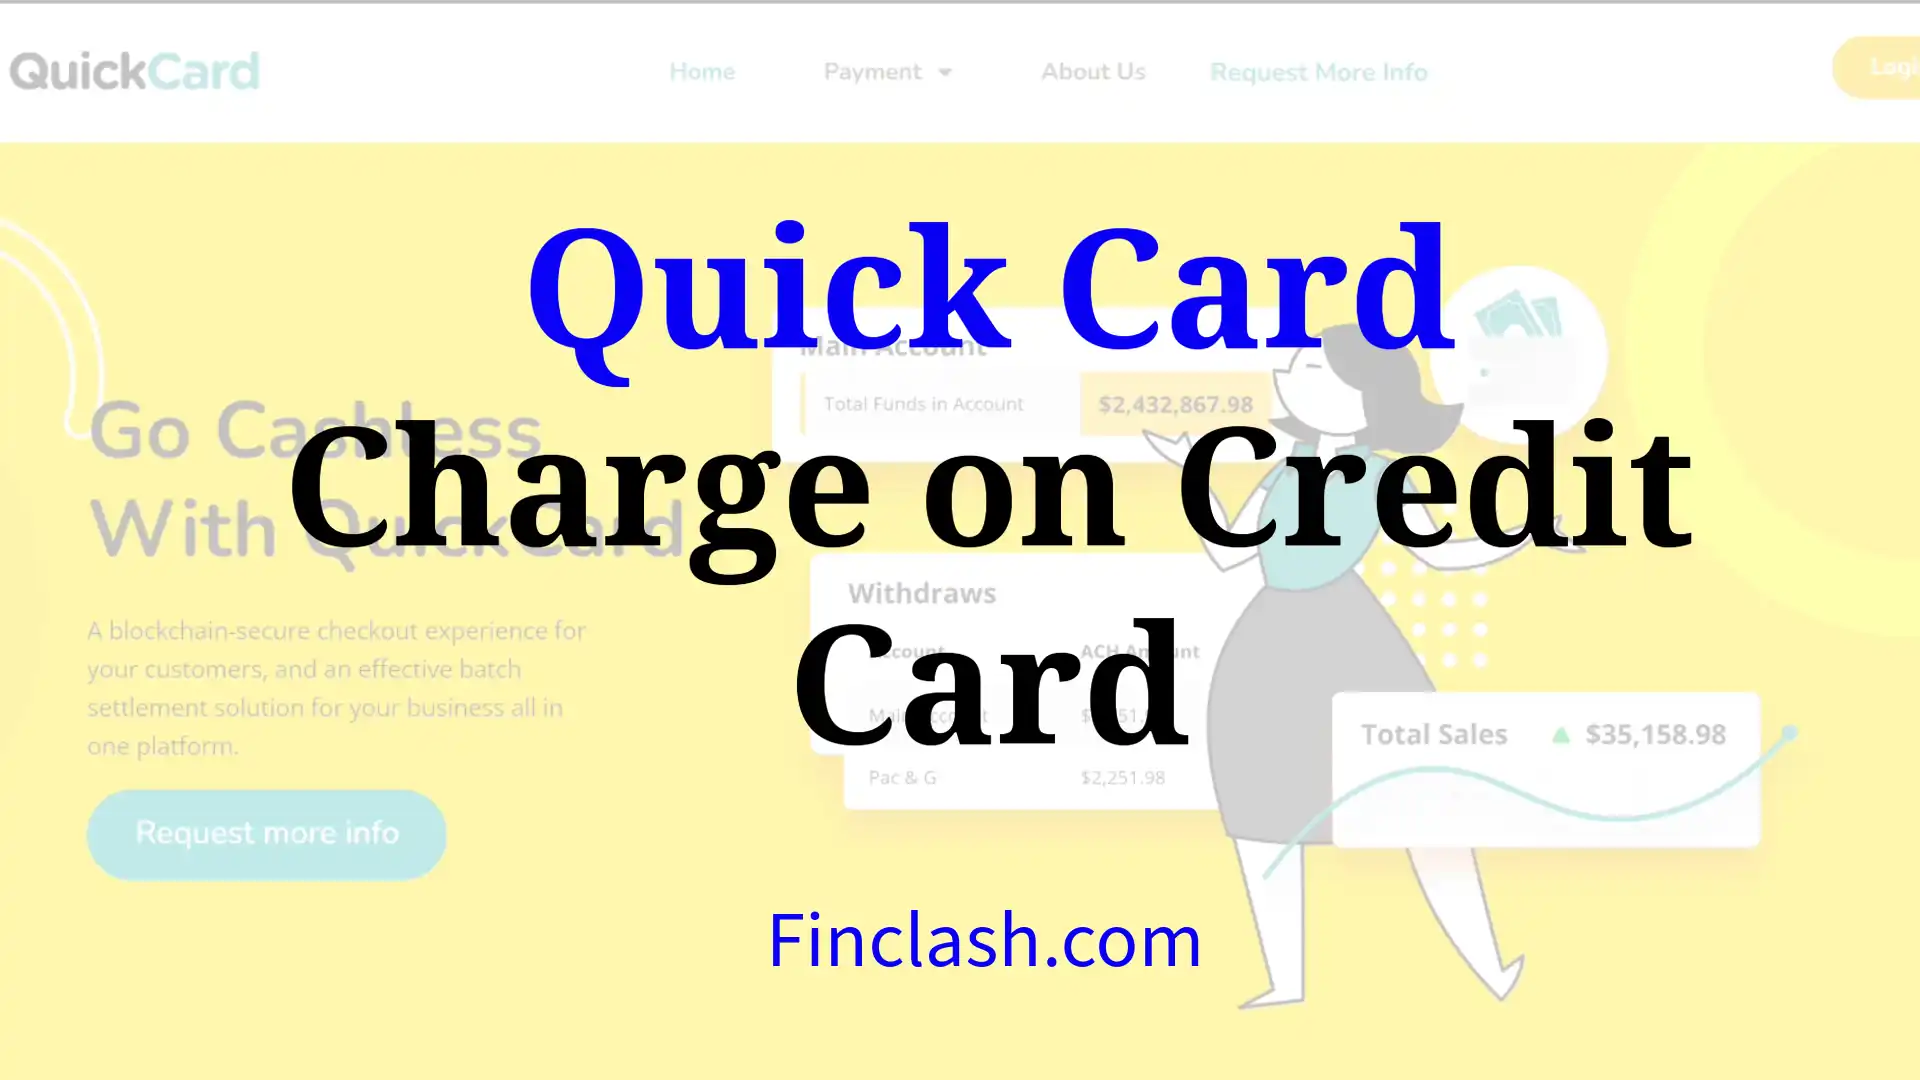 Quick Card Charge on Credit Card